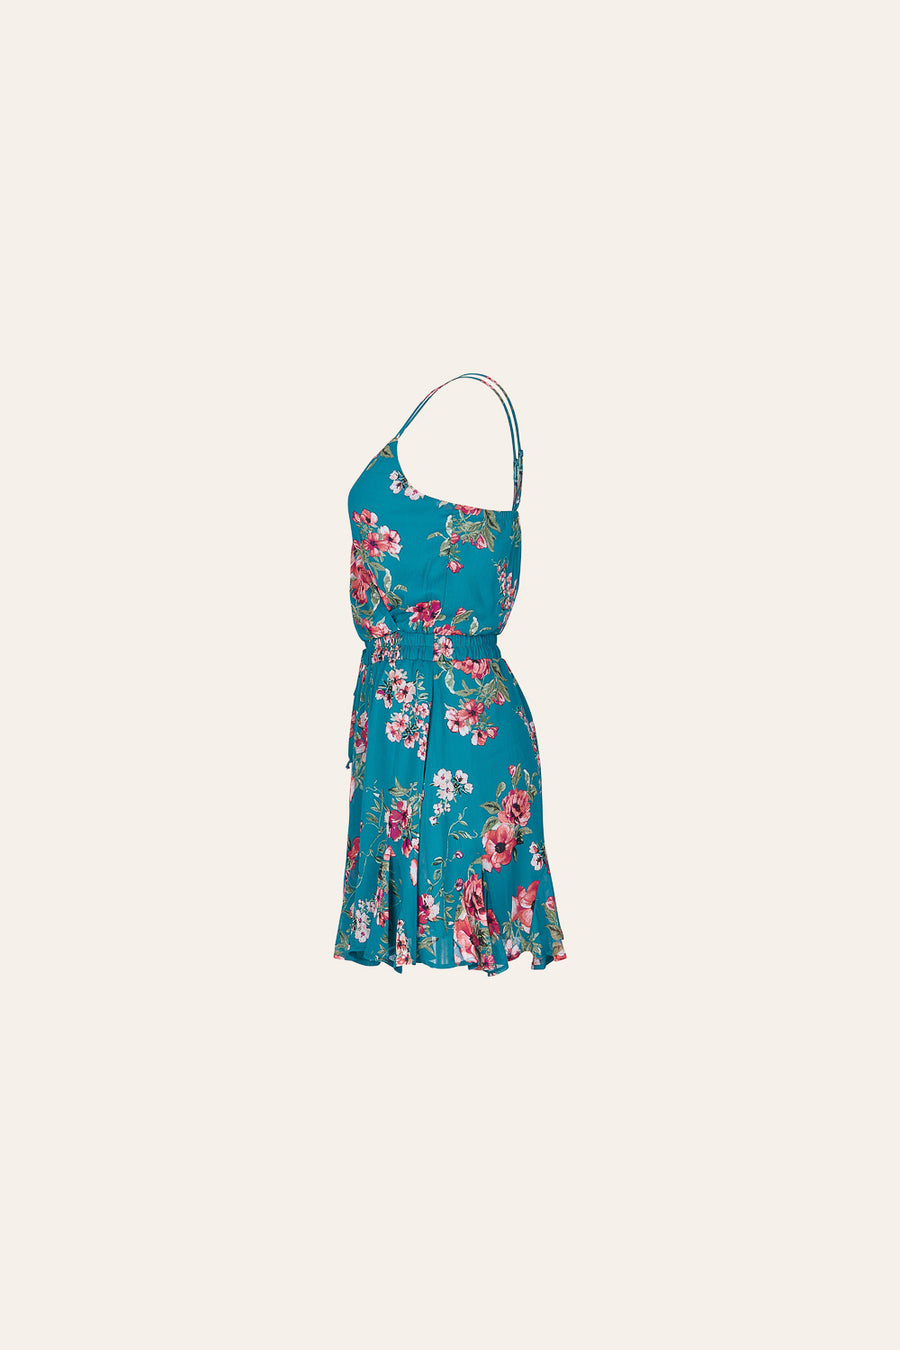 Teal Floral Strappy Dress - Trixxi Clothing